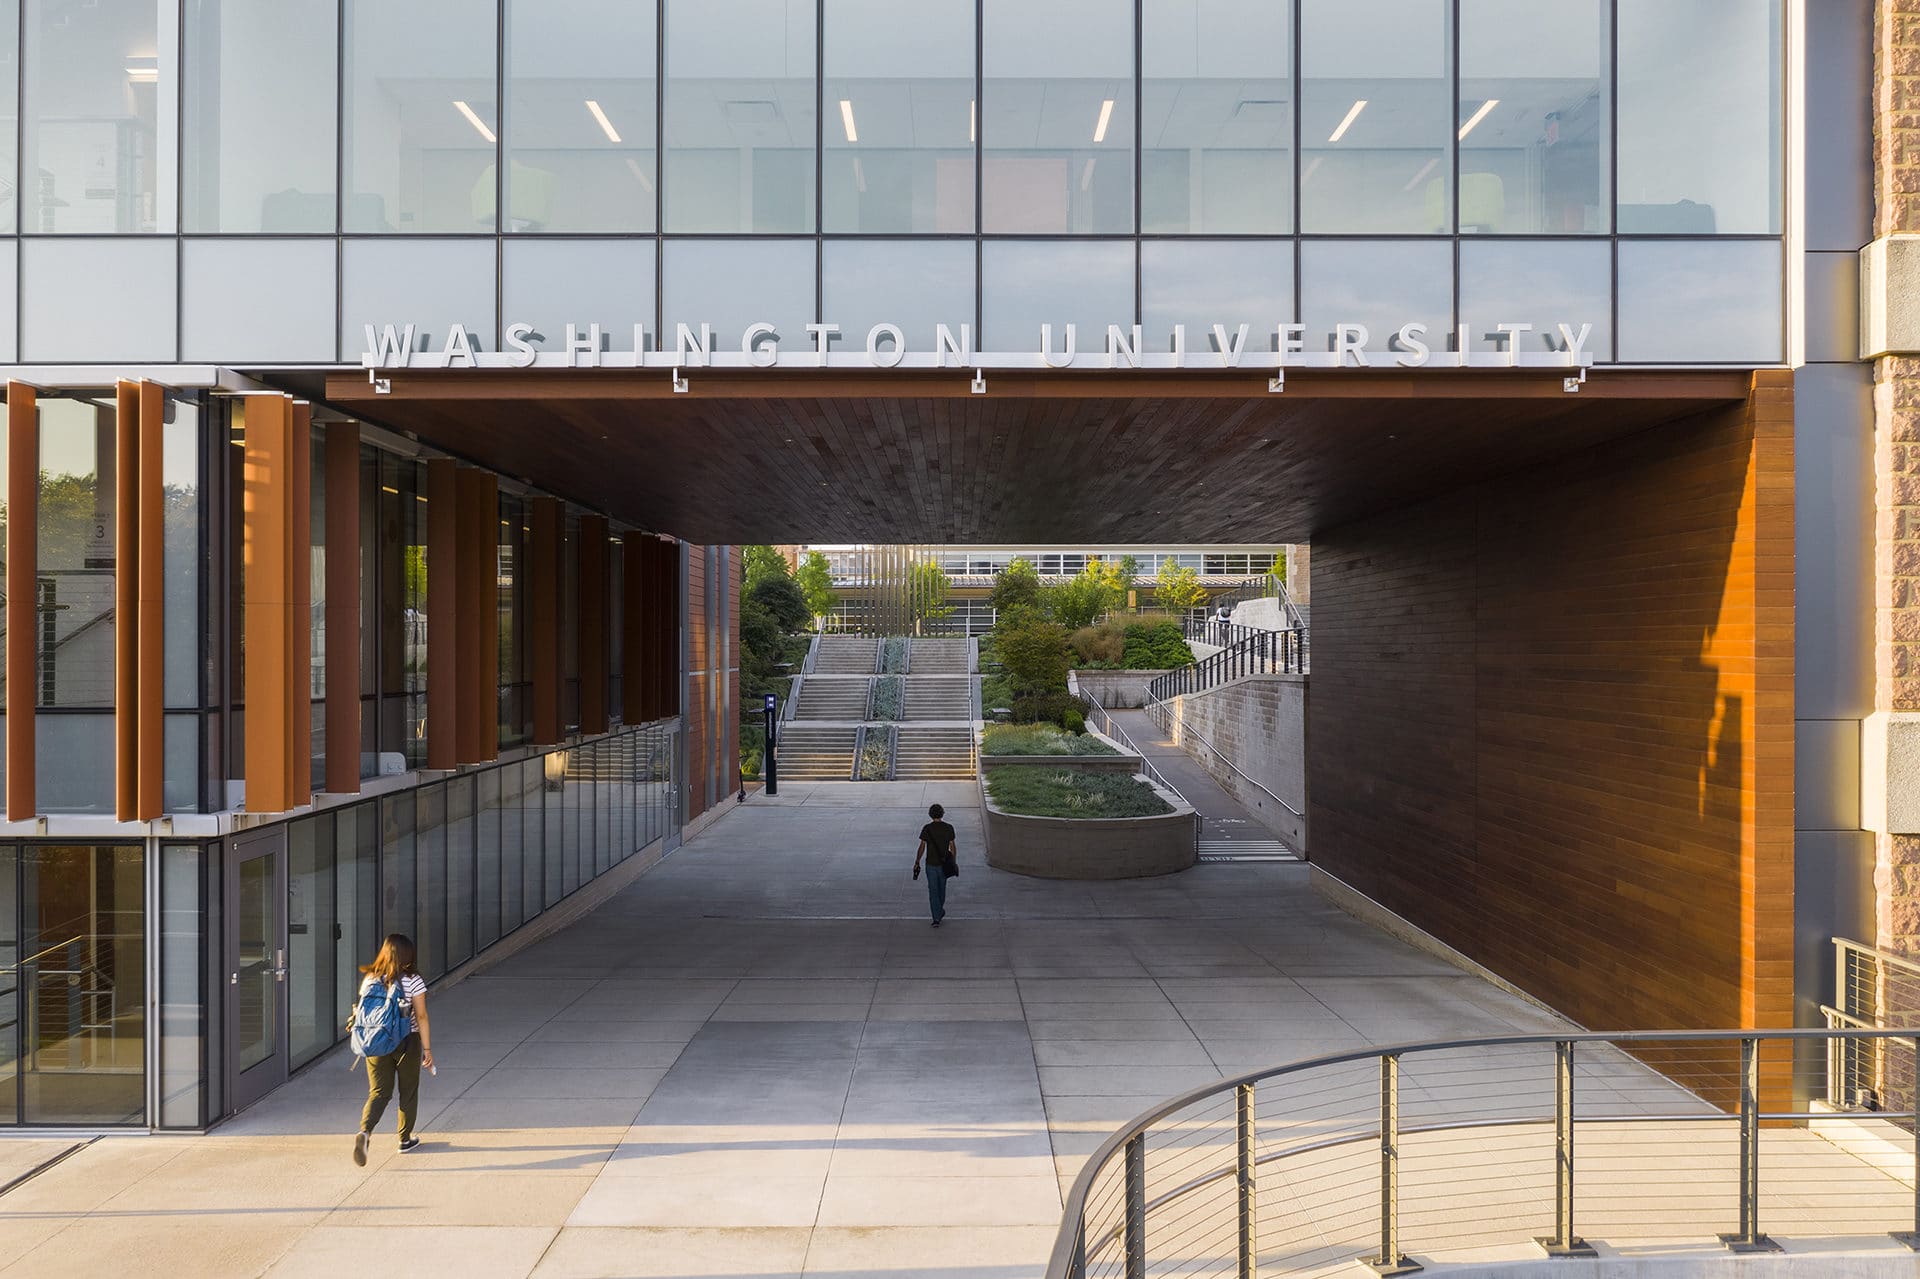 washington university bryan hall walkthrough designed by trivers architectural firm in st. louis